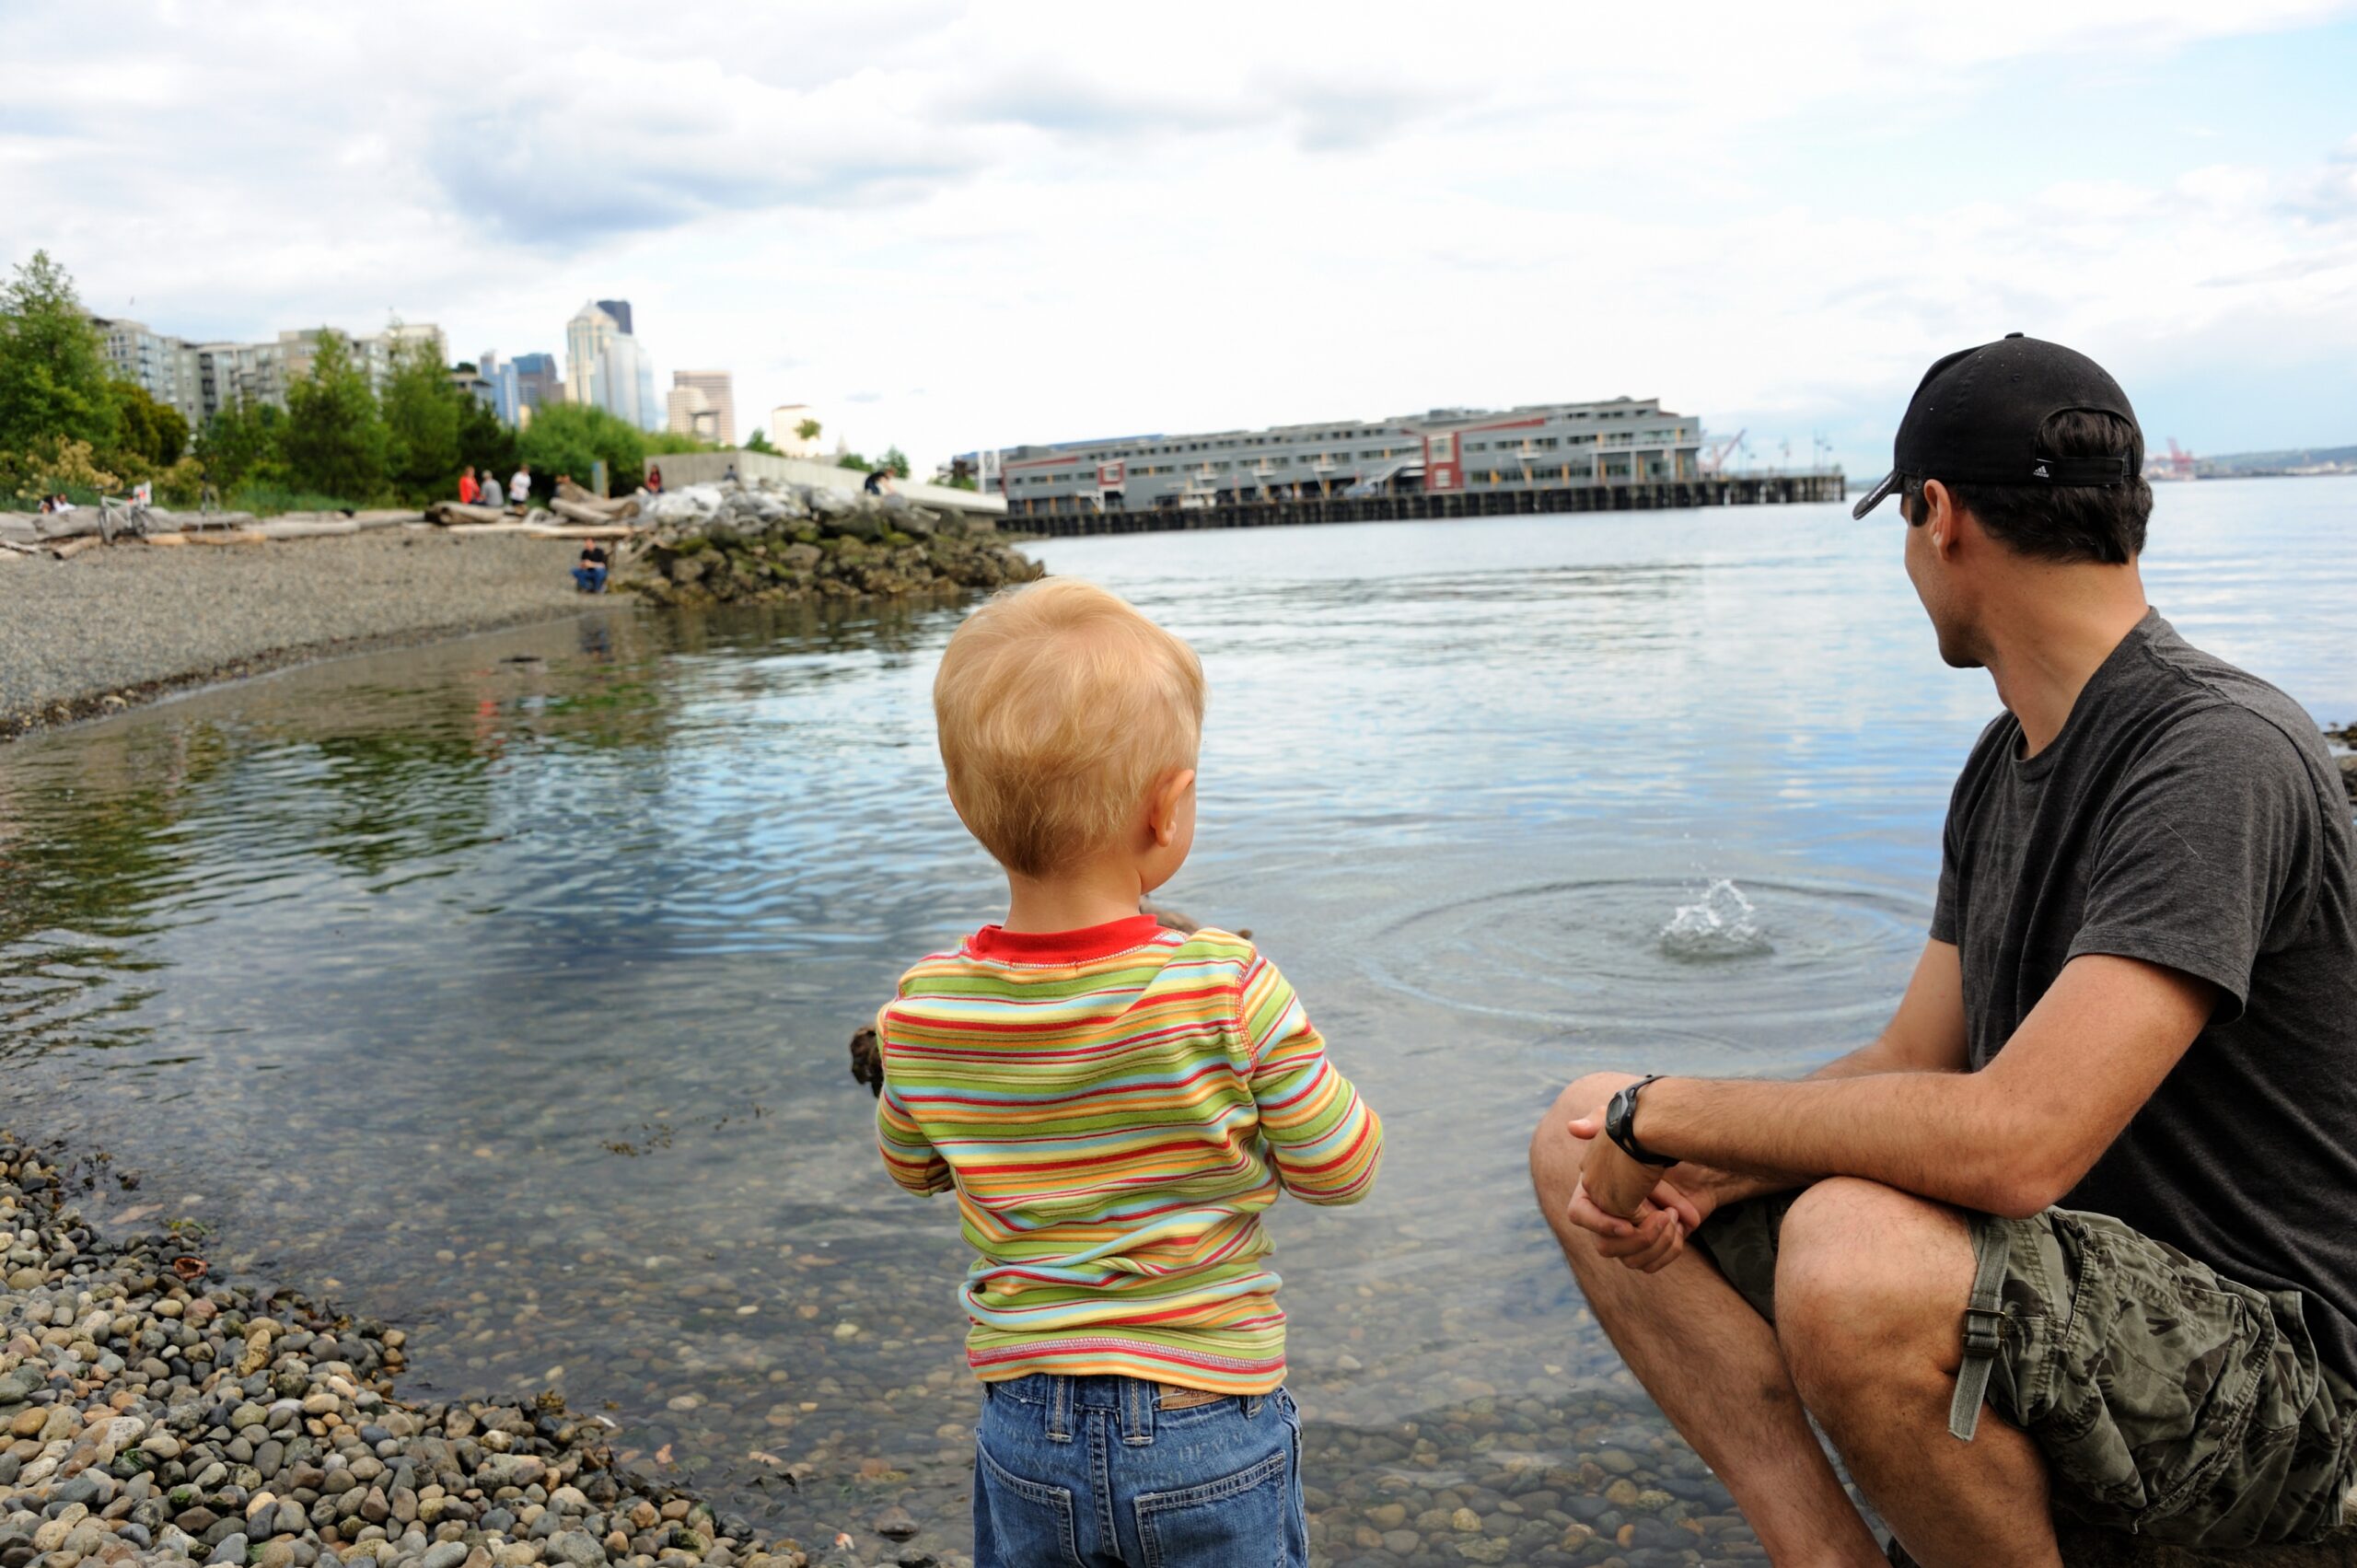 A man and a child watching the water.